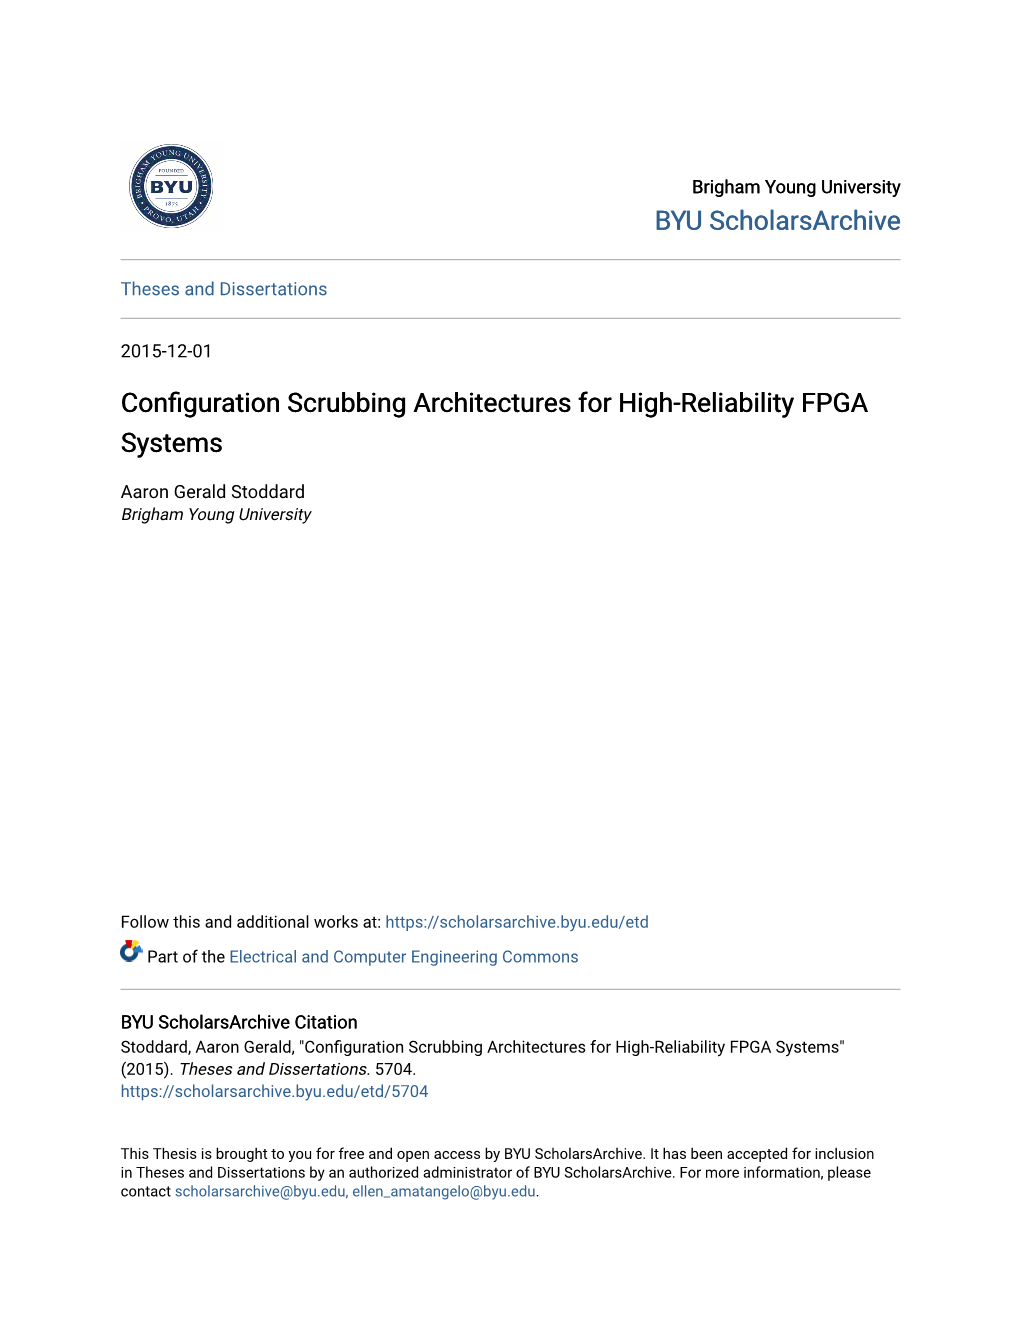 Configuration Scrubbing Architectures for High-Reliability FPGA Systems